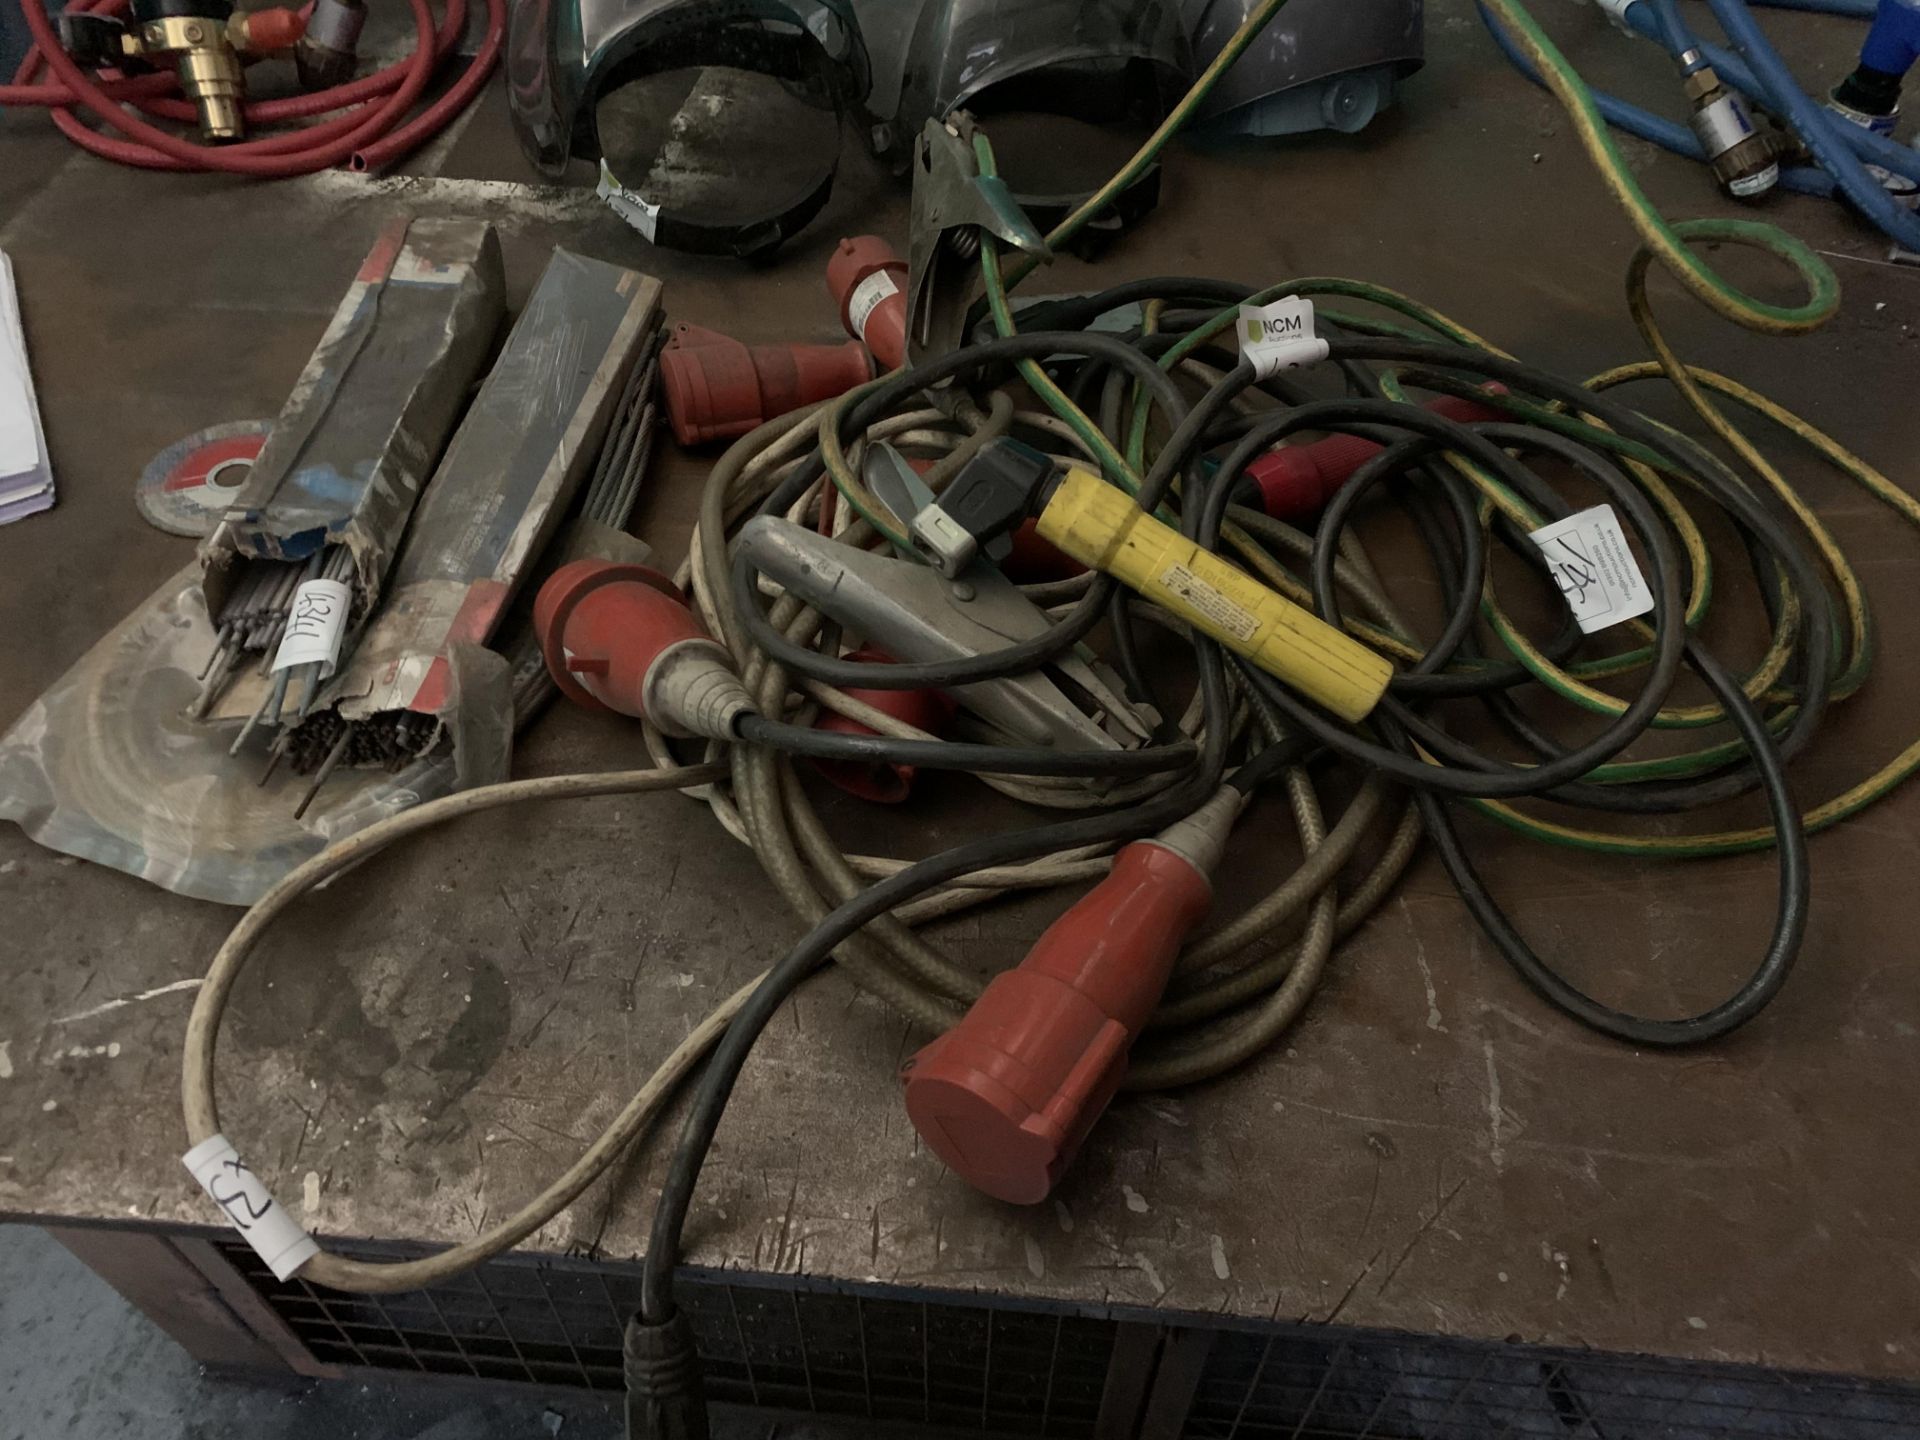 Welding rods and leads - Image 2 of 3